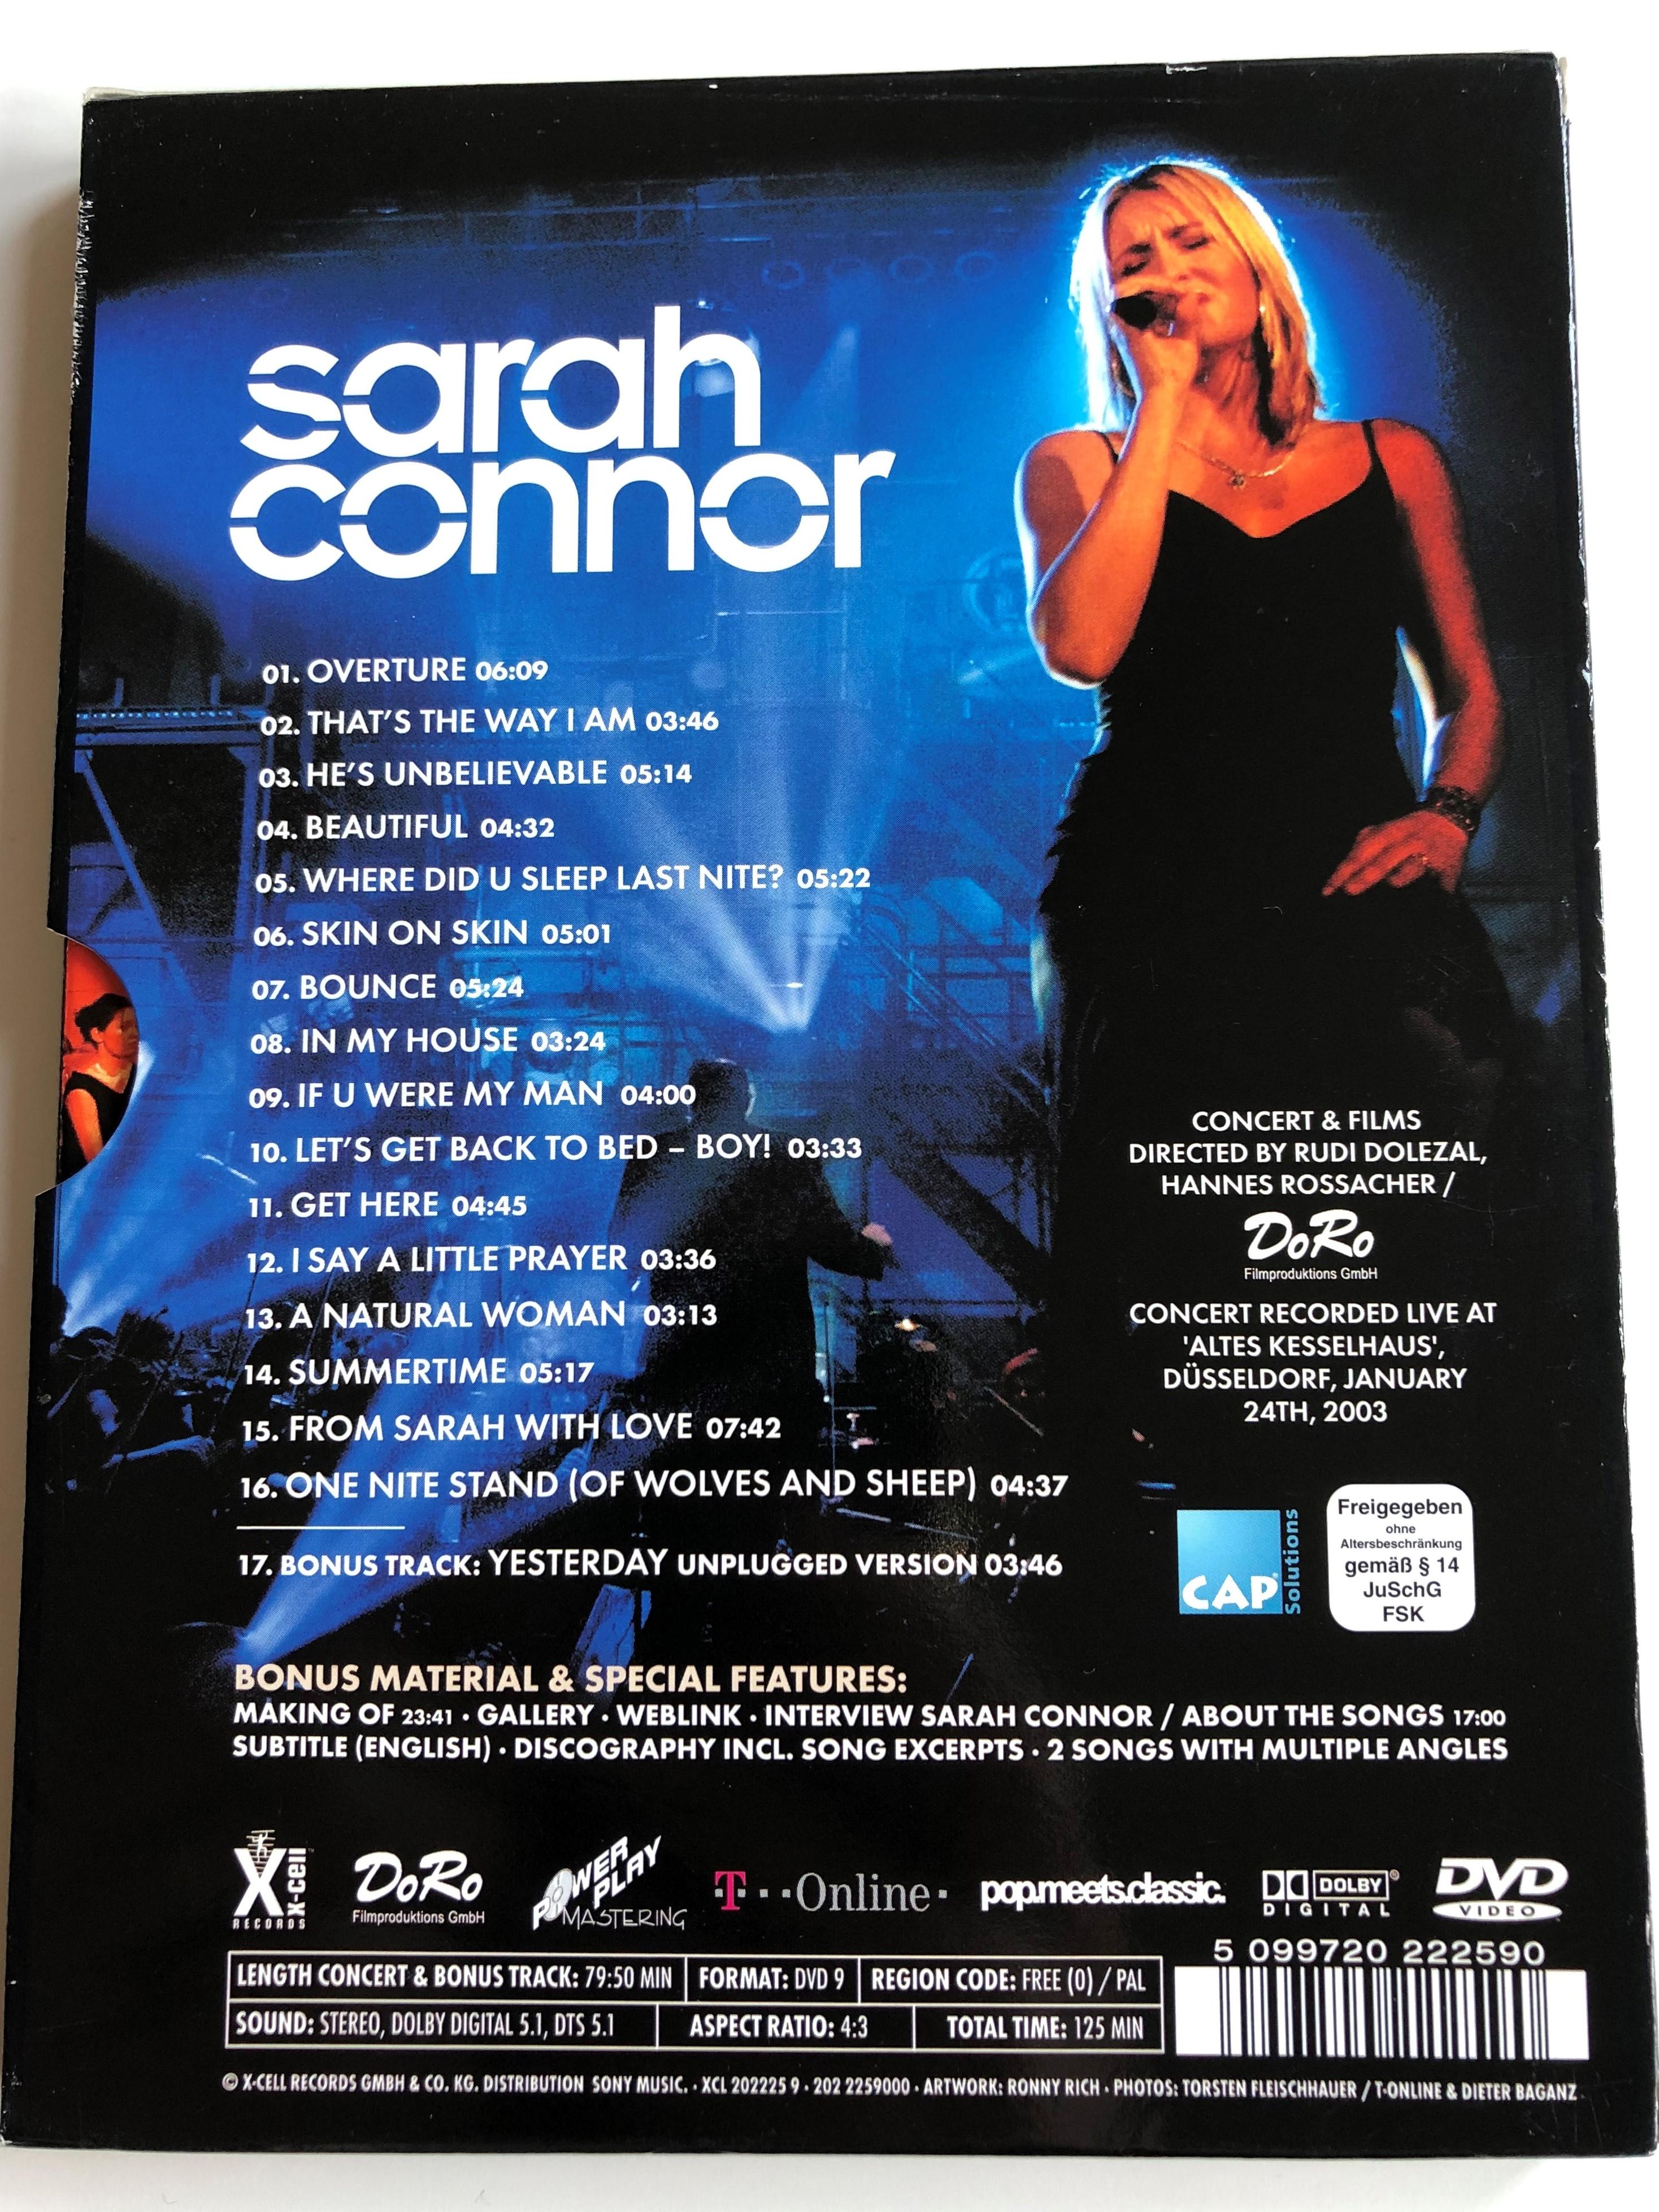 Sarah Connor - Live in Concert DVD 2003 A night to remember - Pop Meets  Classic / Directed by Rudi Dolezal - Hannes Rossacher / That's the Way I  am, Bounce, A